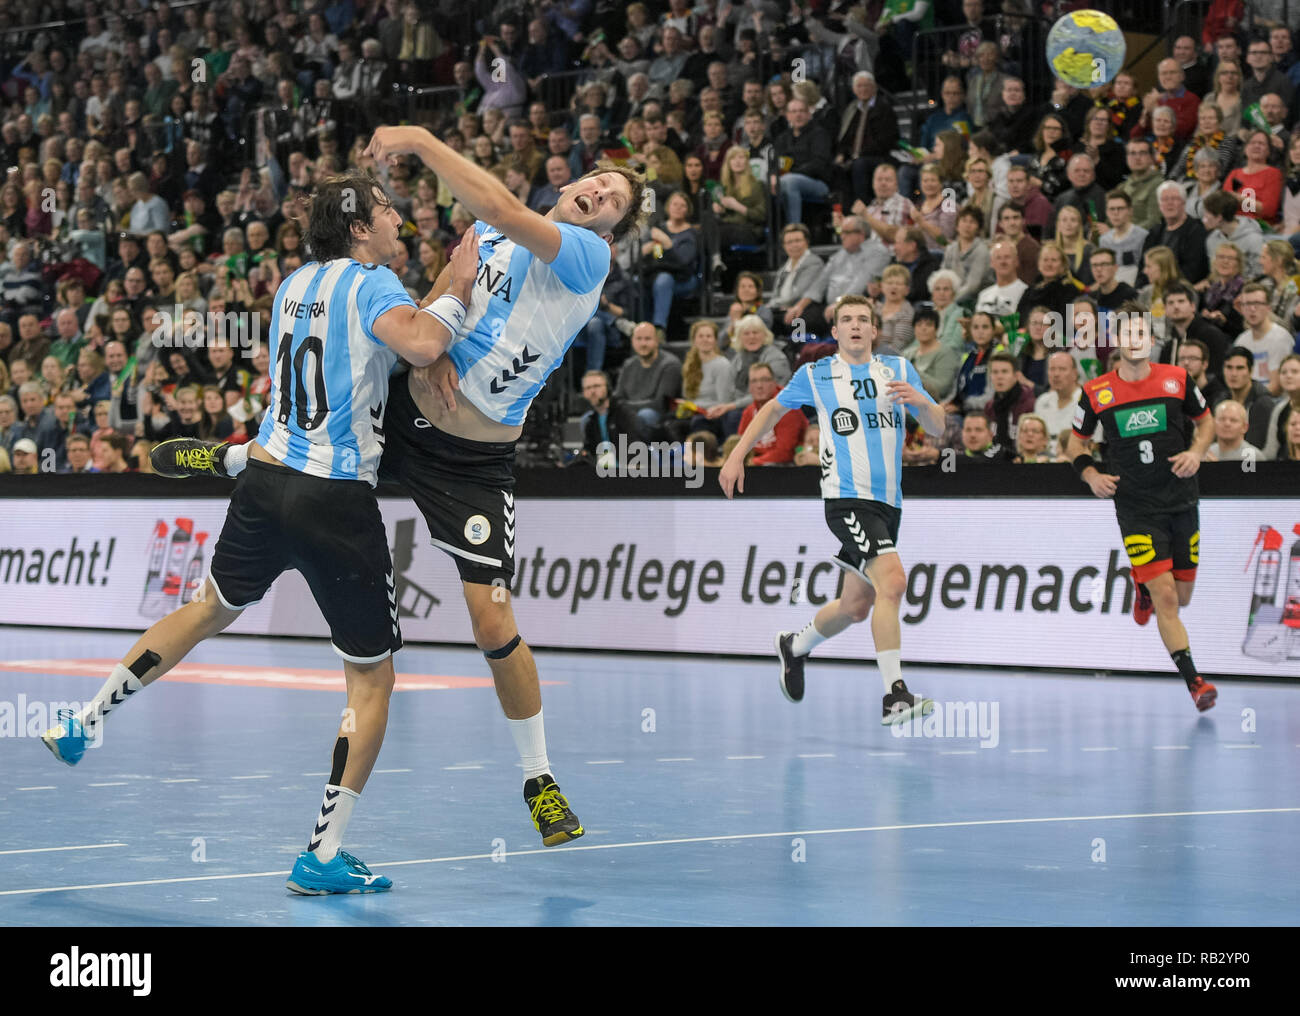 Kiel, Germany. 06th Jan, 2019. Handball: International match, Germany - Argentina. Argentina's Federico Matias Vieyra (l) and Argentina's Juan Pablo Fernandez cannot prevent a goal from being scored by a long drop. Credit: Axel Heimken/dpa/Alamy Live News Stock Photo